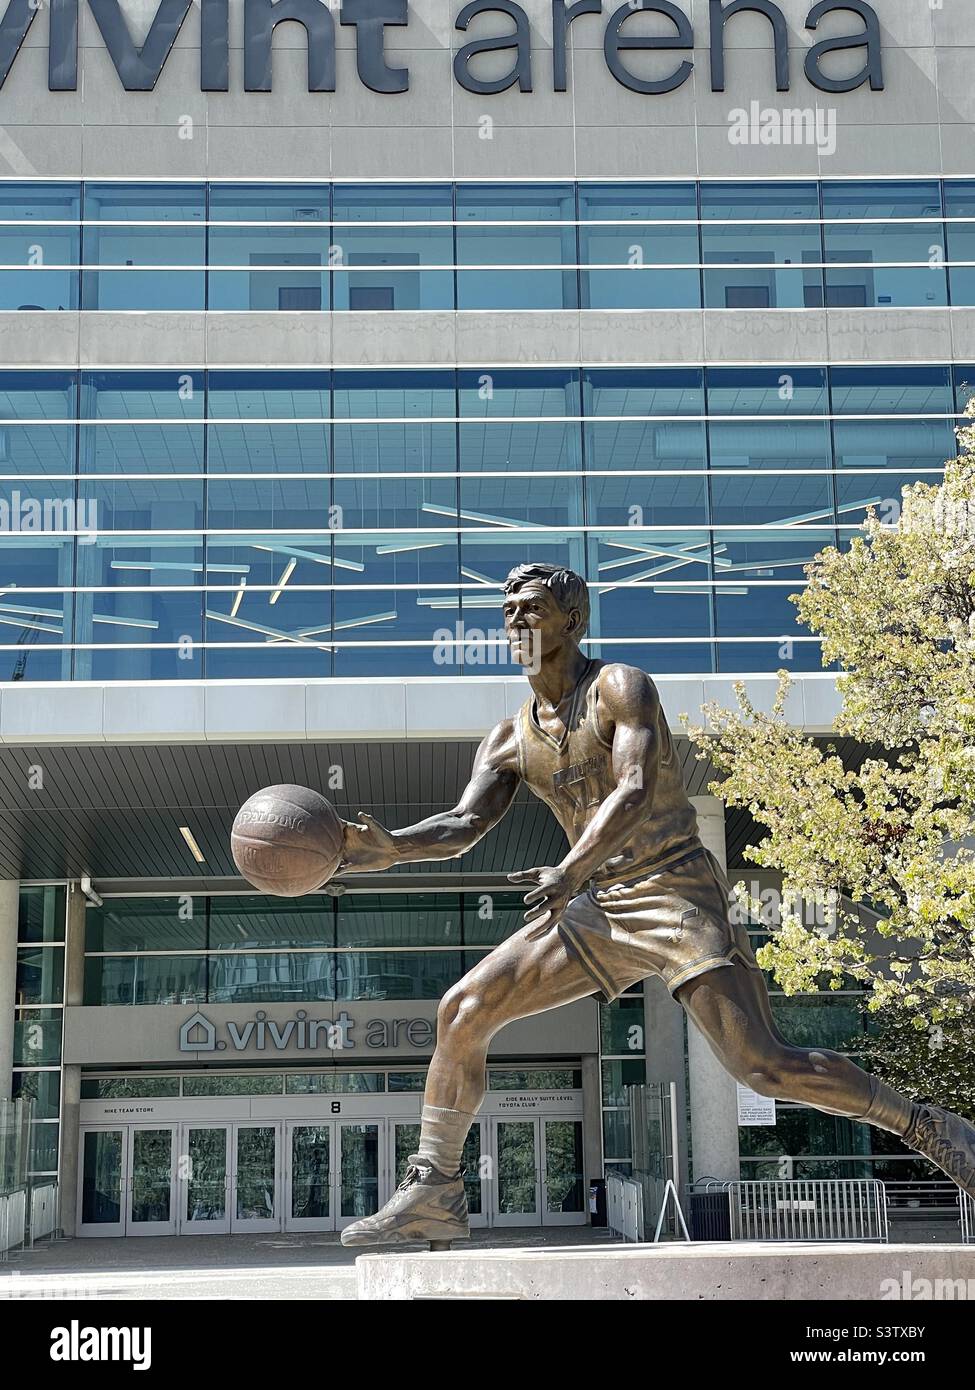 The front of the Vivint Arena in SLC, Utah, USA, the home of the NBA team The Utah Jazz. Here one of the two bronze statues of famous former players erected in front is shown: John Stockton. Stock Photo